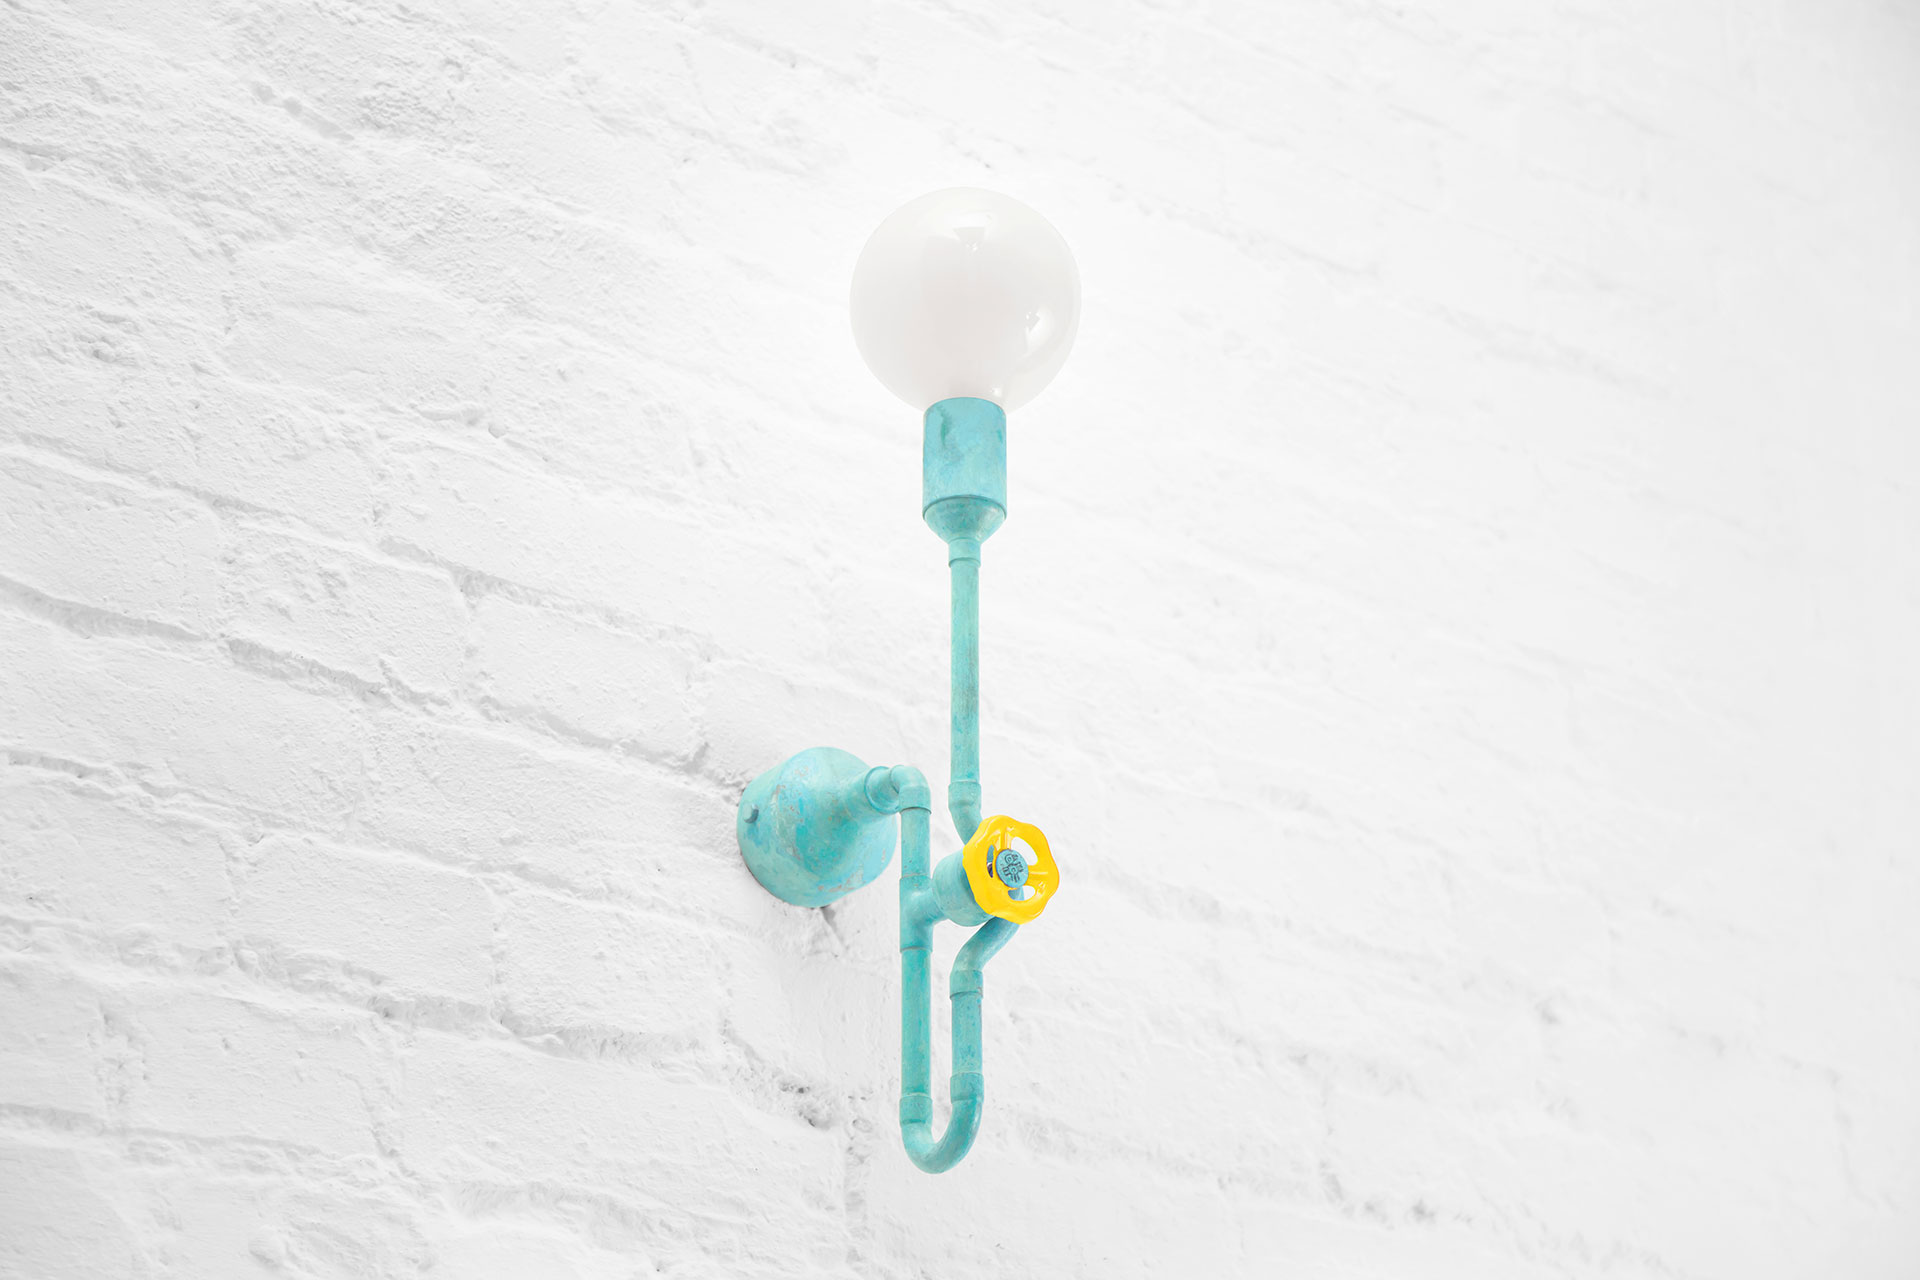 Modern design turquoise sconce in urban chic apartment